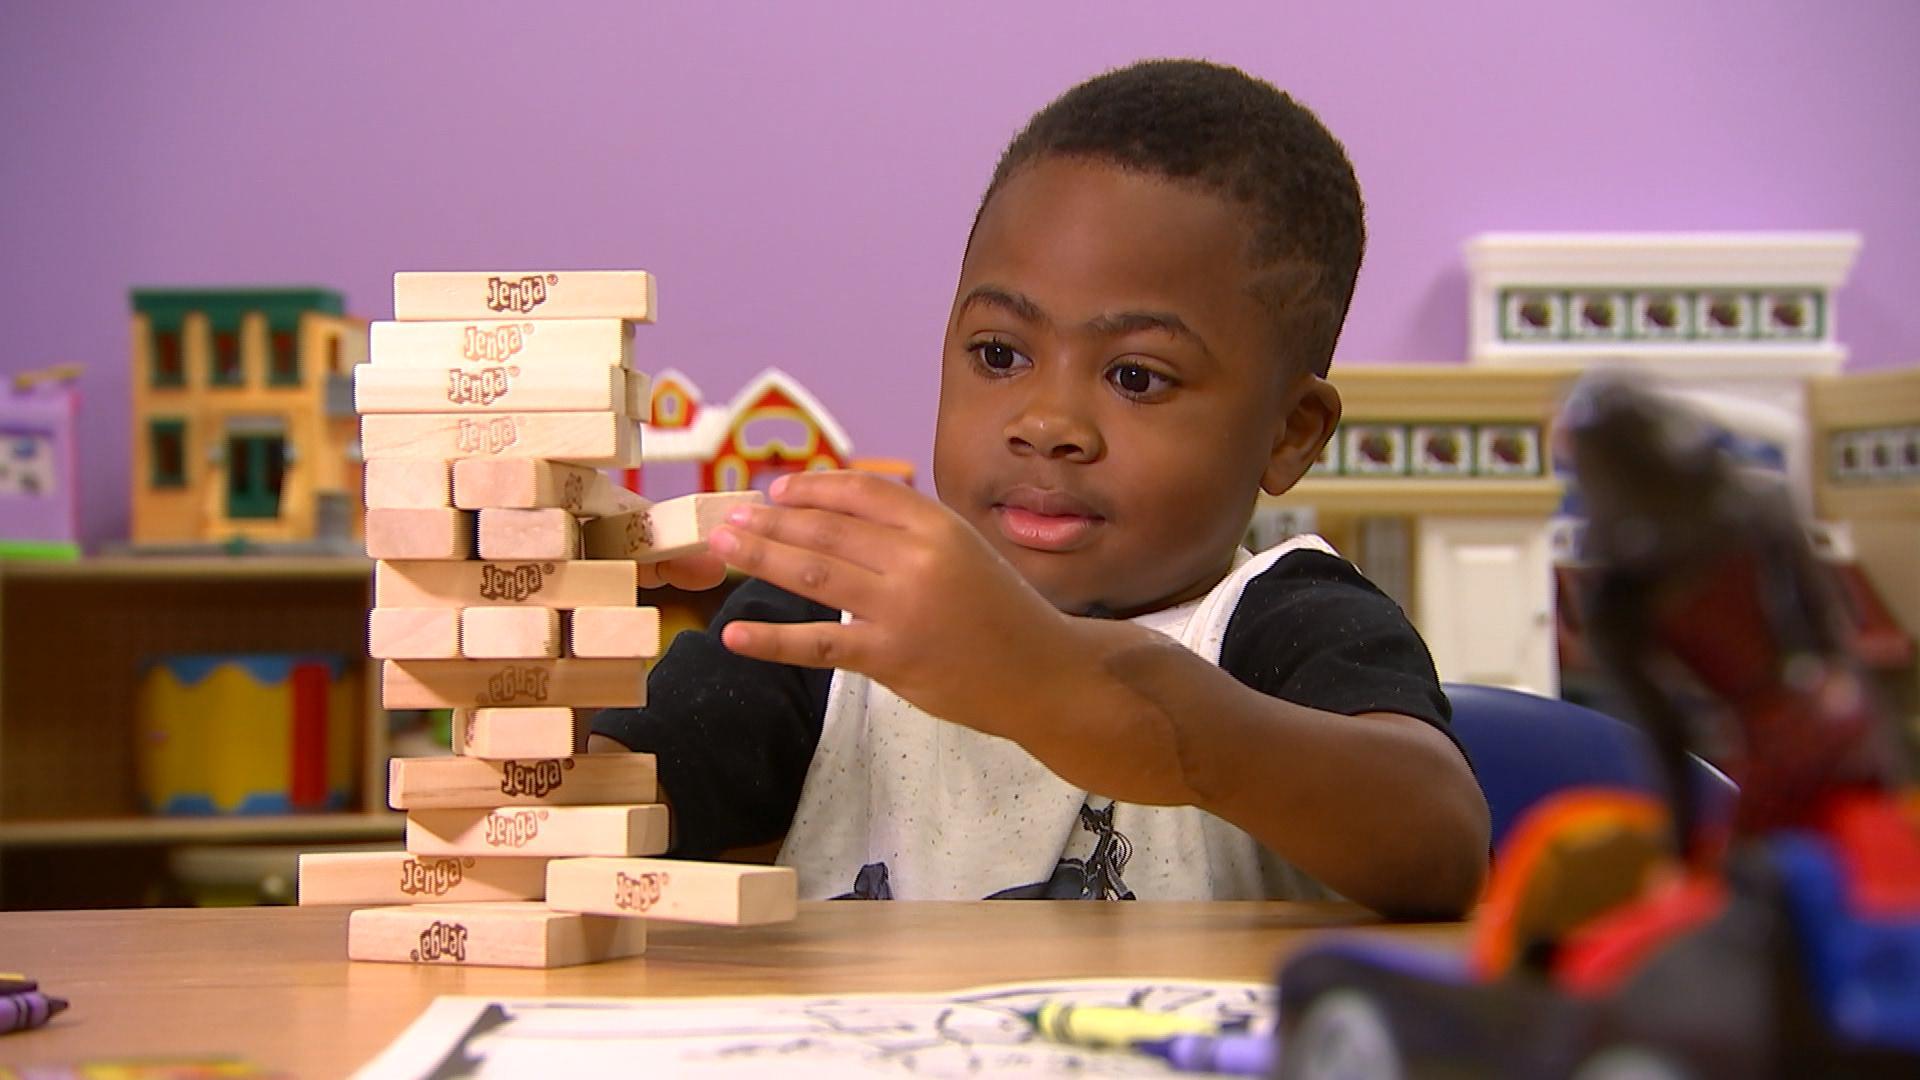 Zion Harvey Does Push-Ups One Year After Double Hand Transplant - NBC News